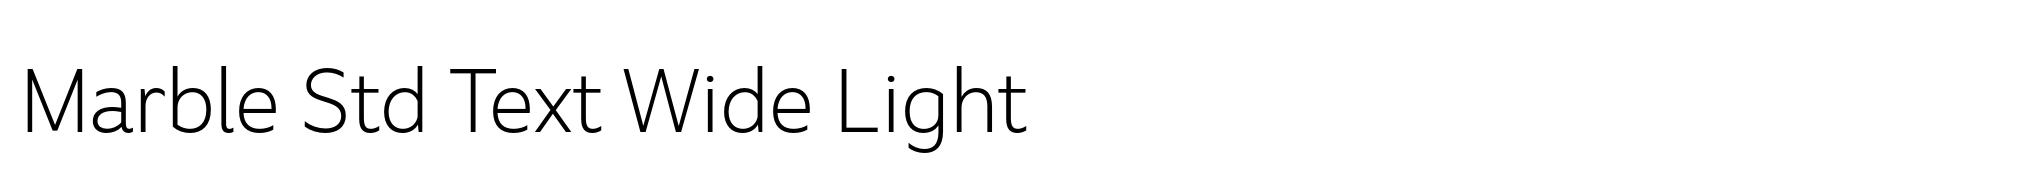 Marble Std Text Wide Light image